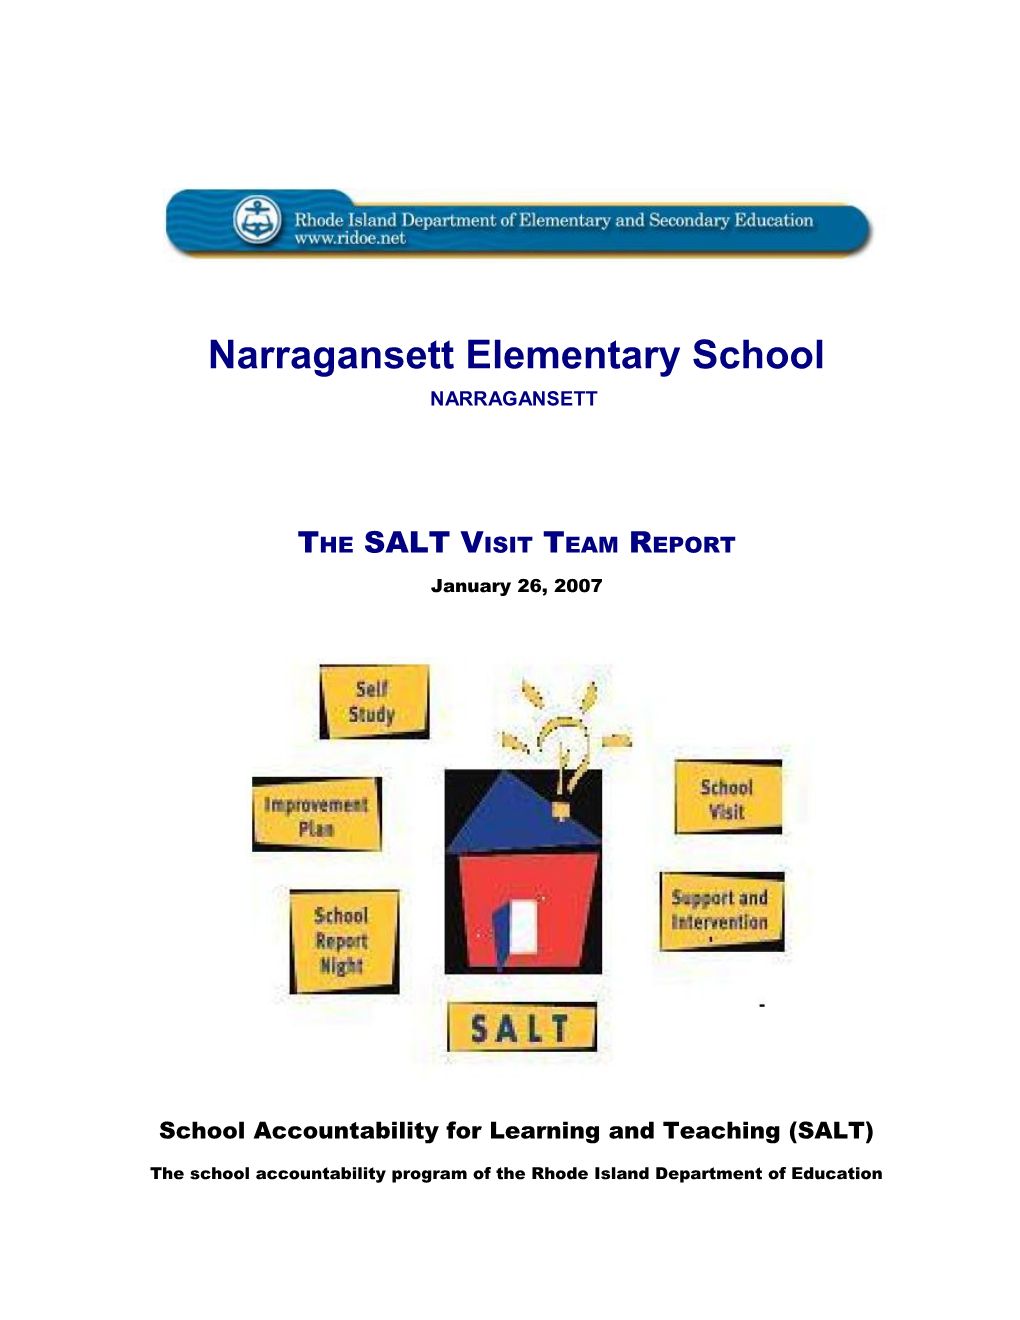 School Accountability for Learning and Teaching (SALT) s3